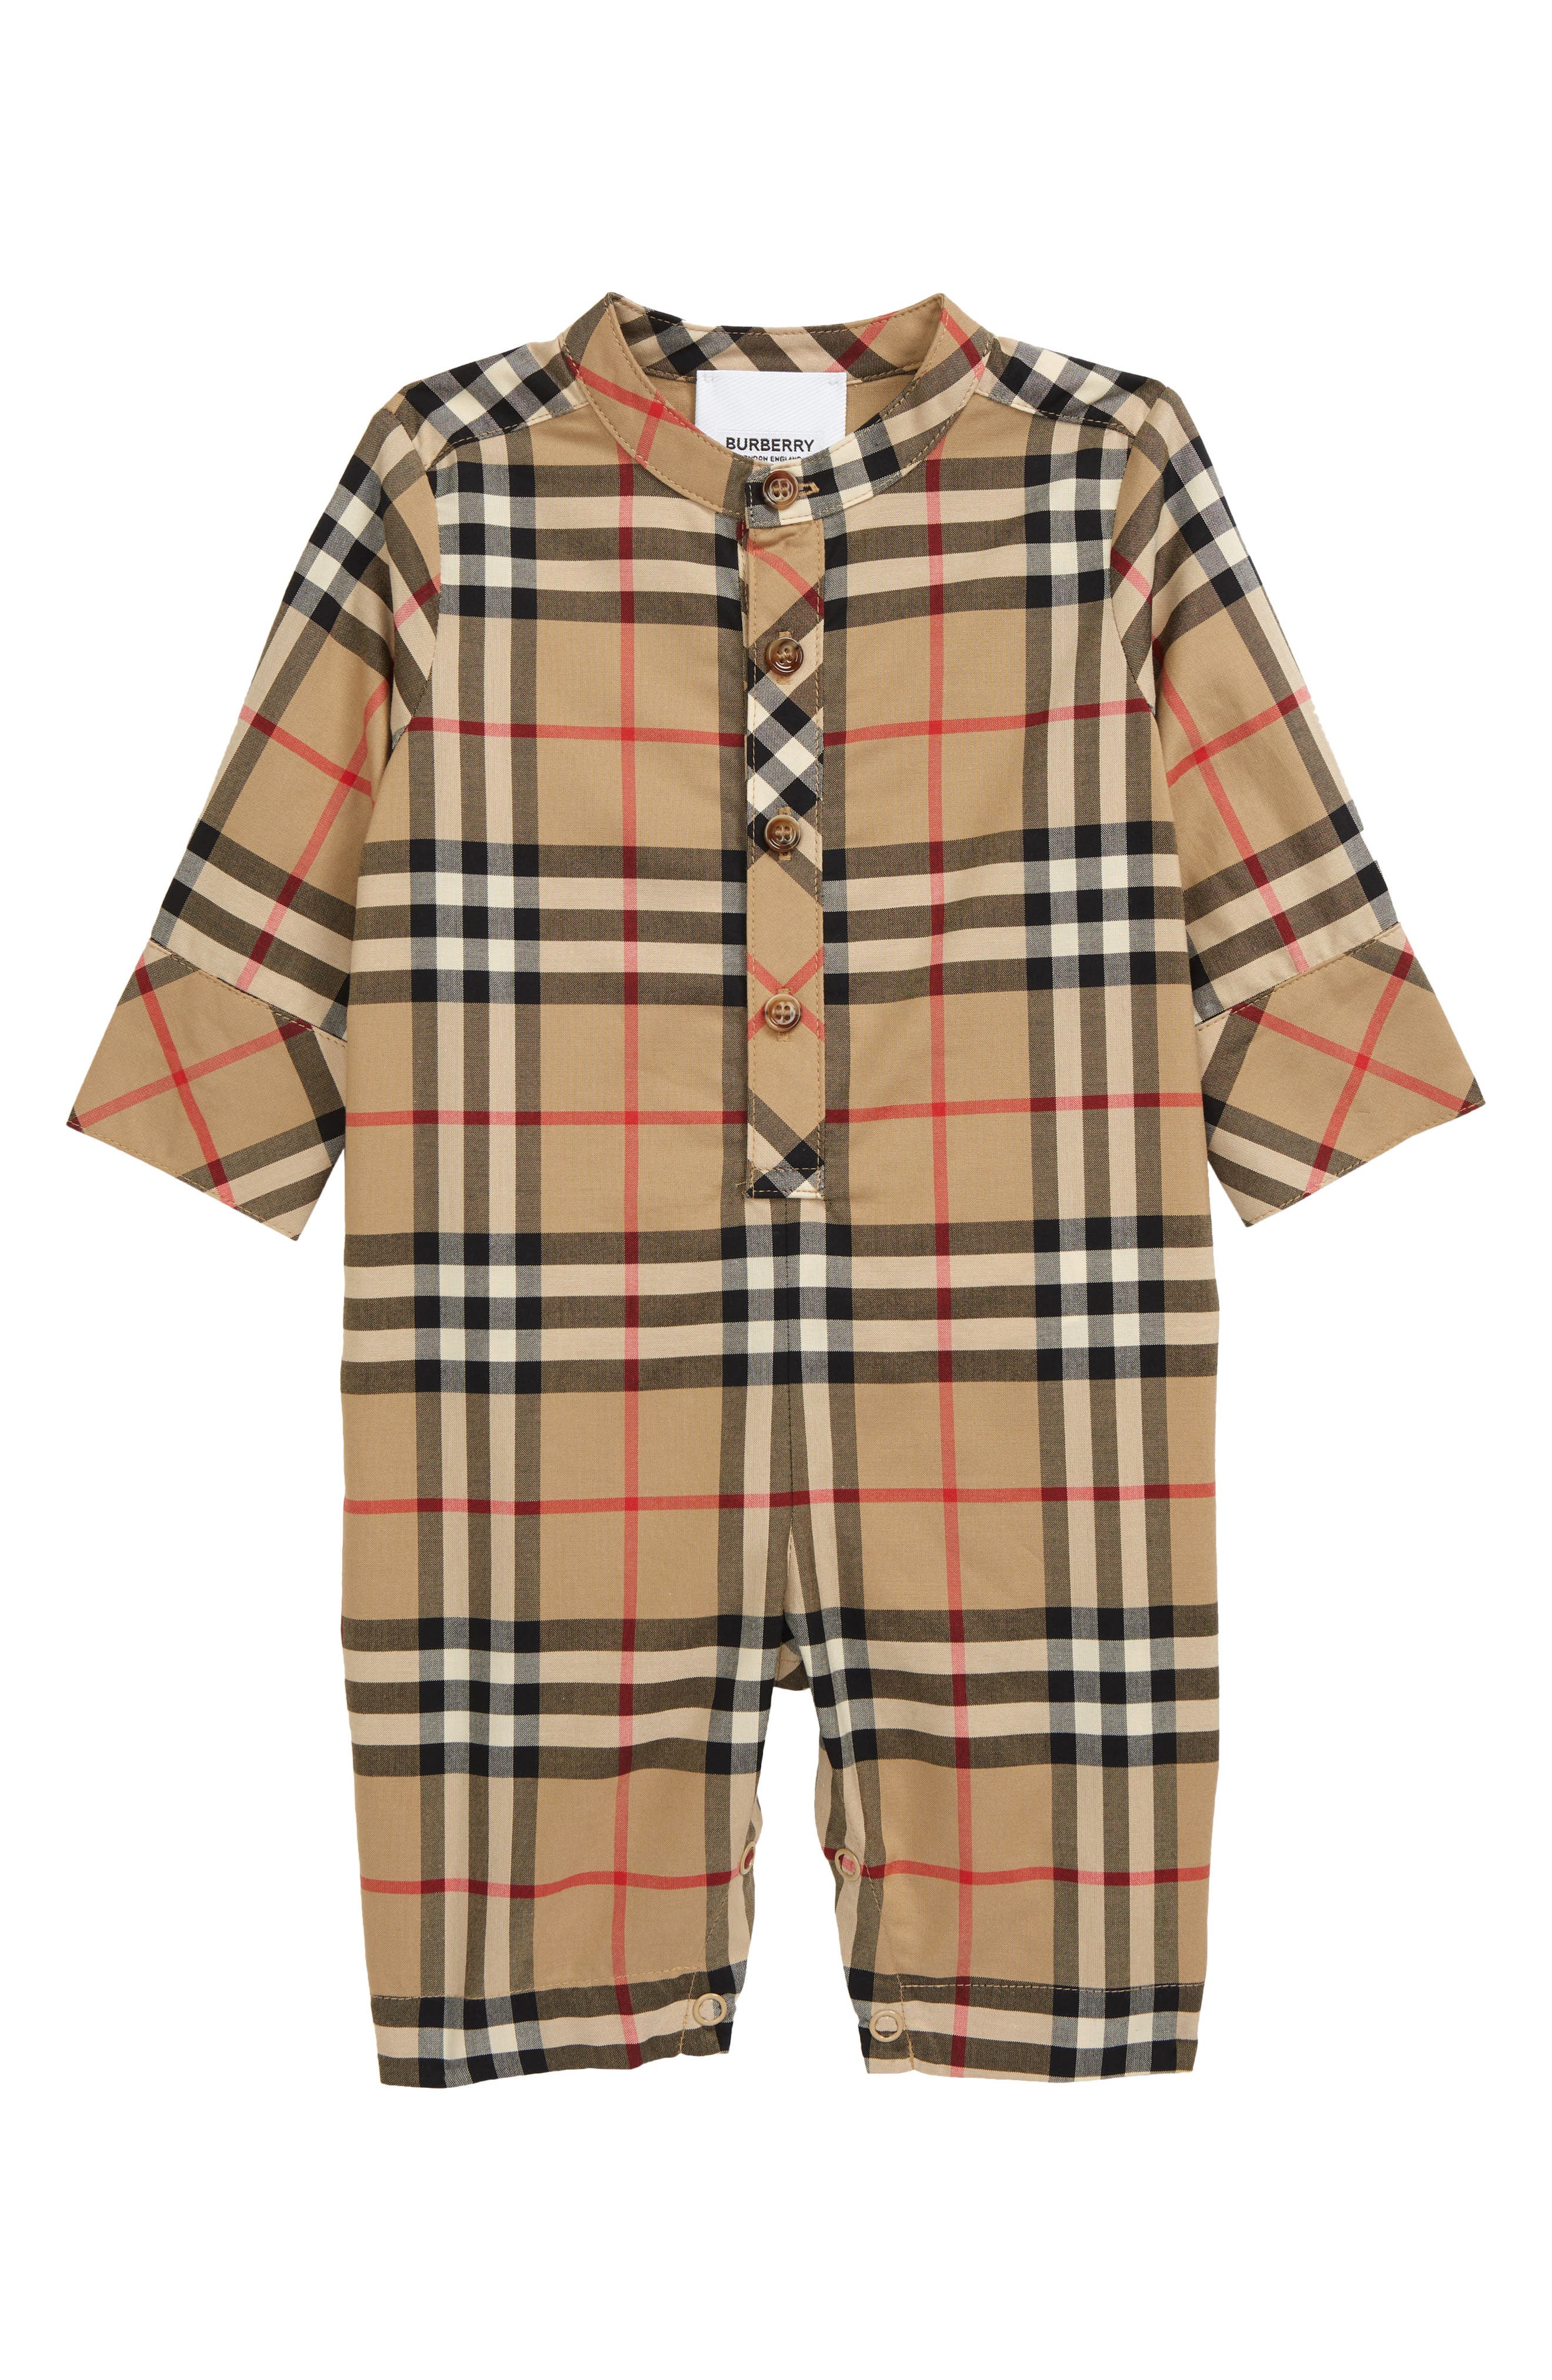 babies burberry clothes